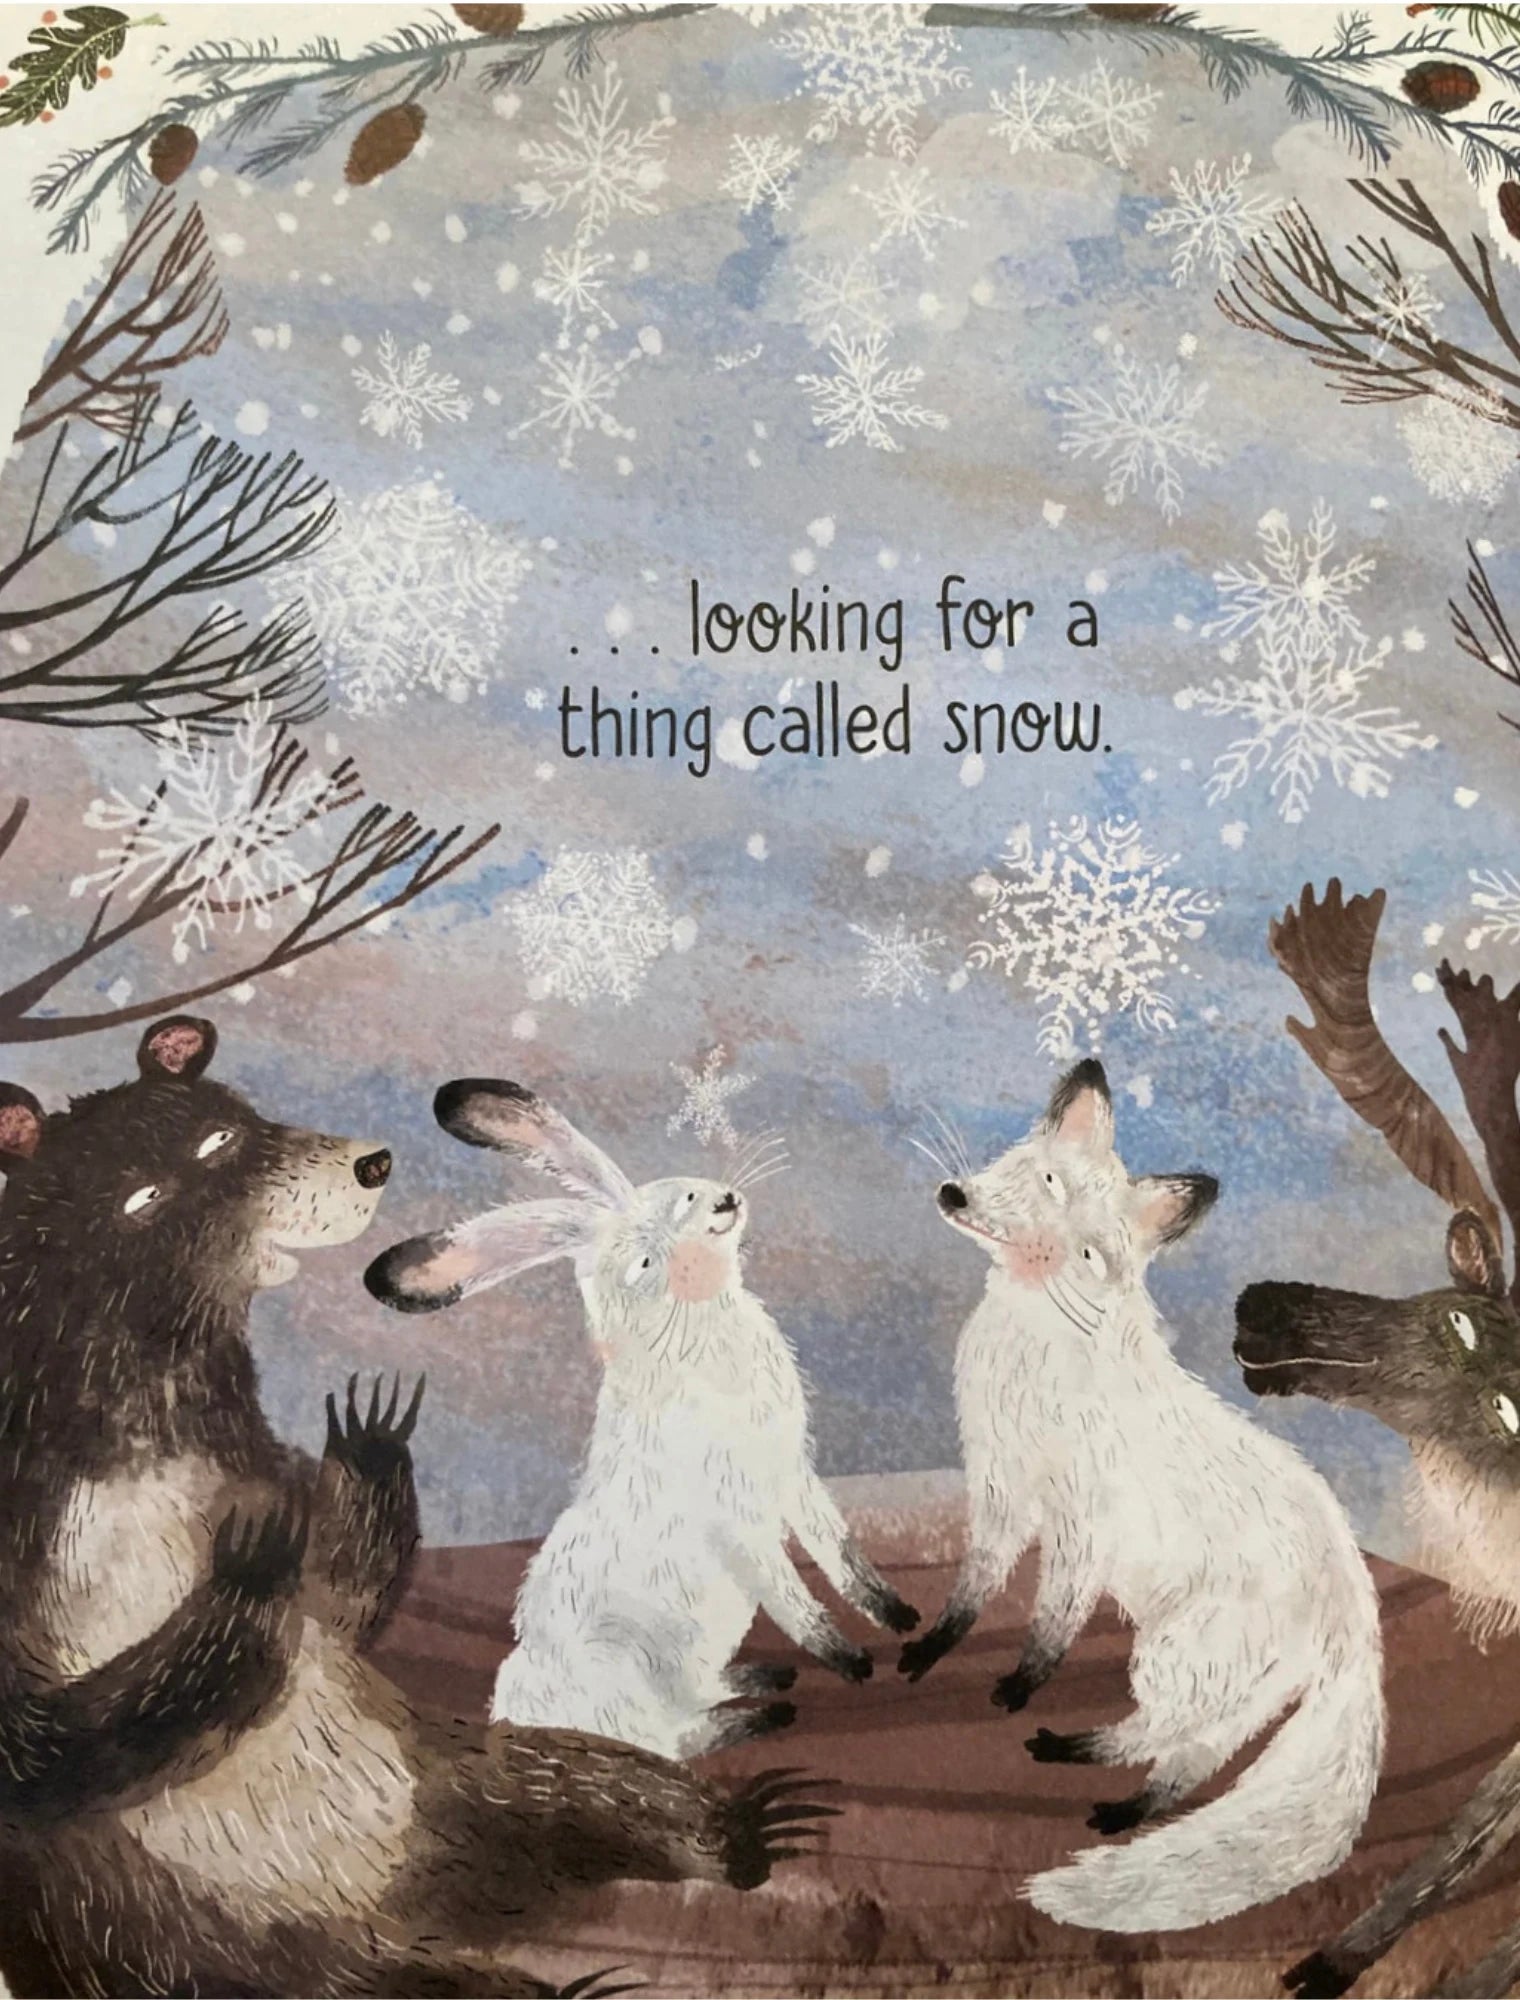 A Thing Called Snow Children’s Book - Alder & Alouette